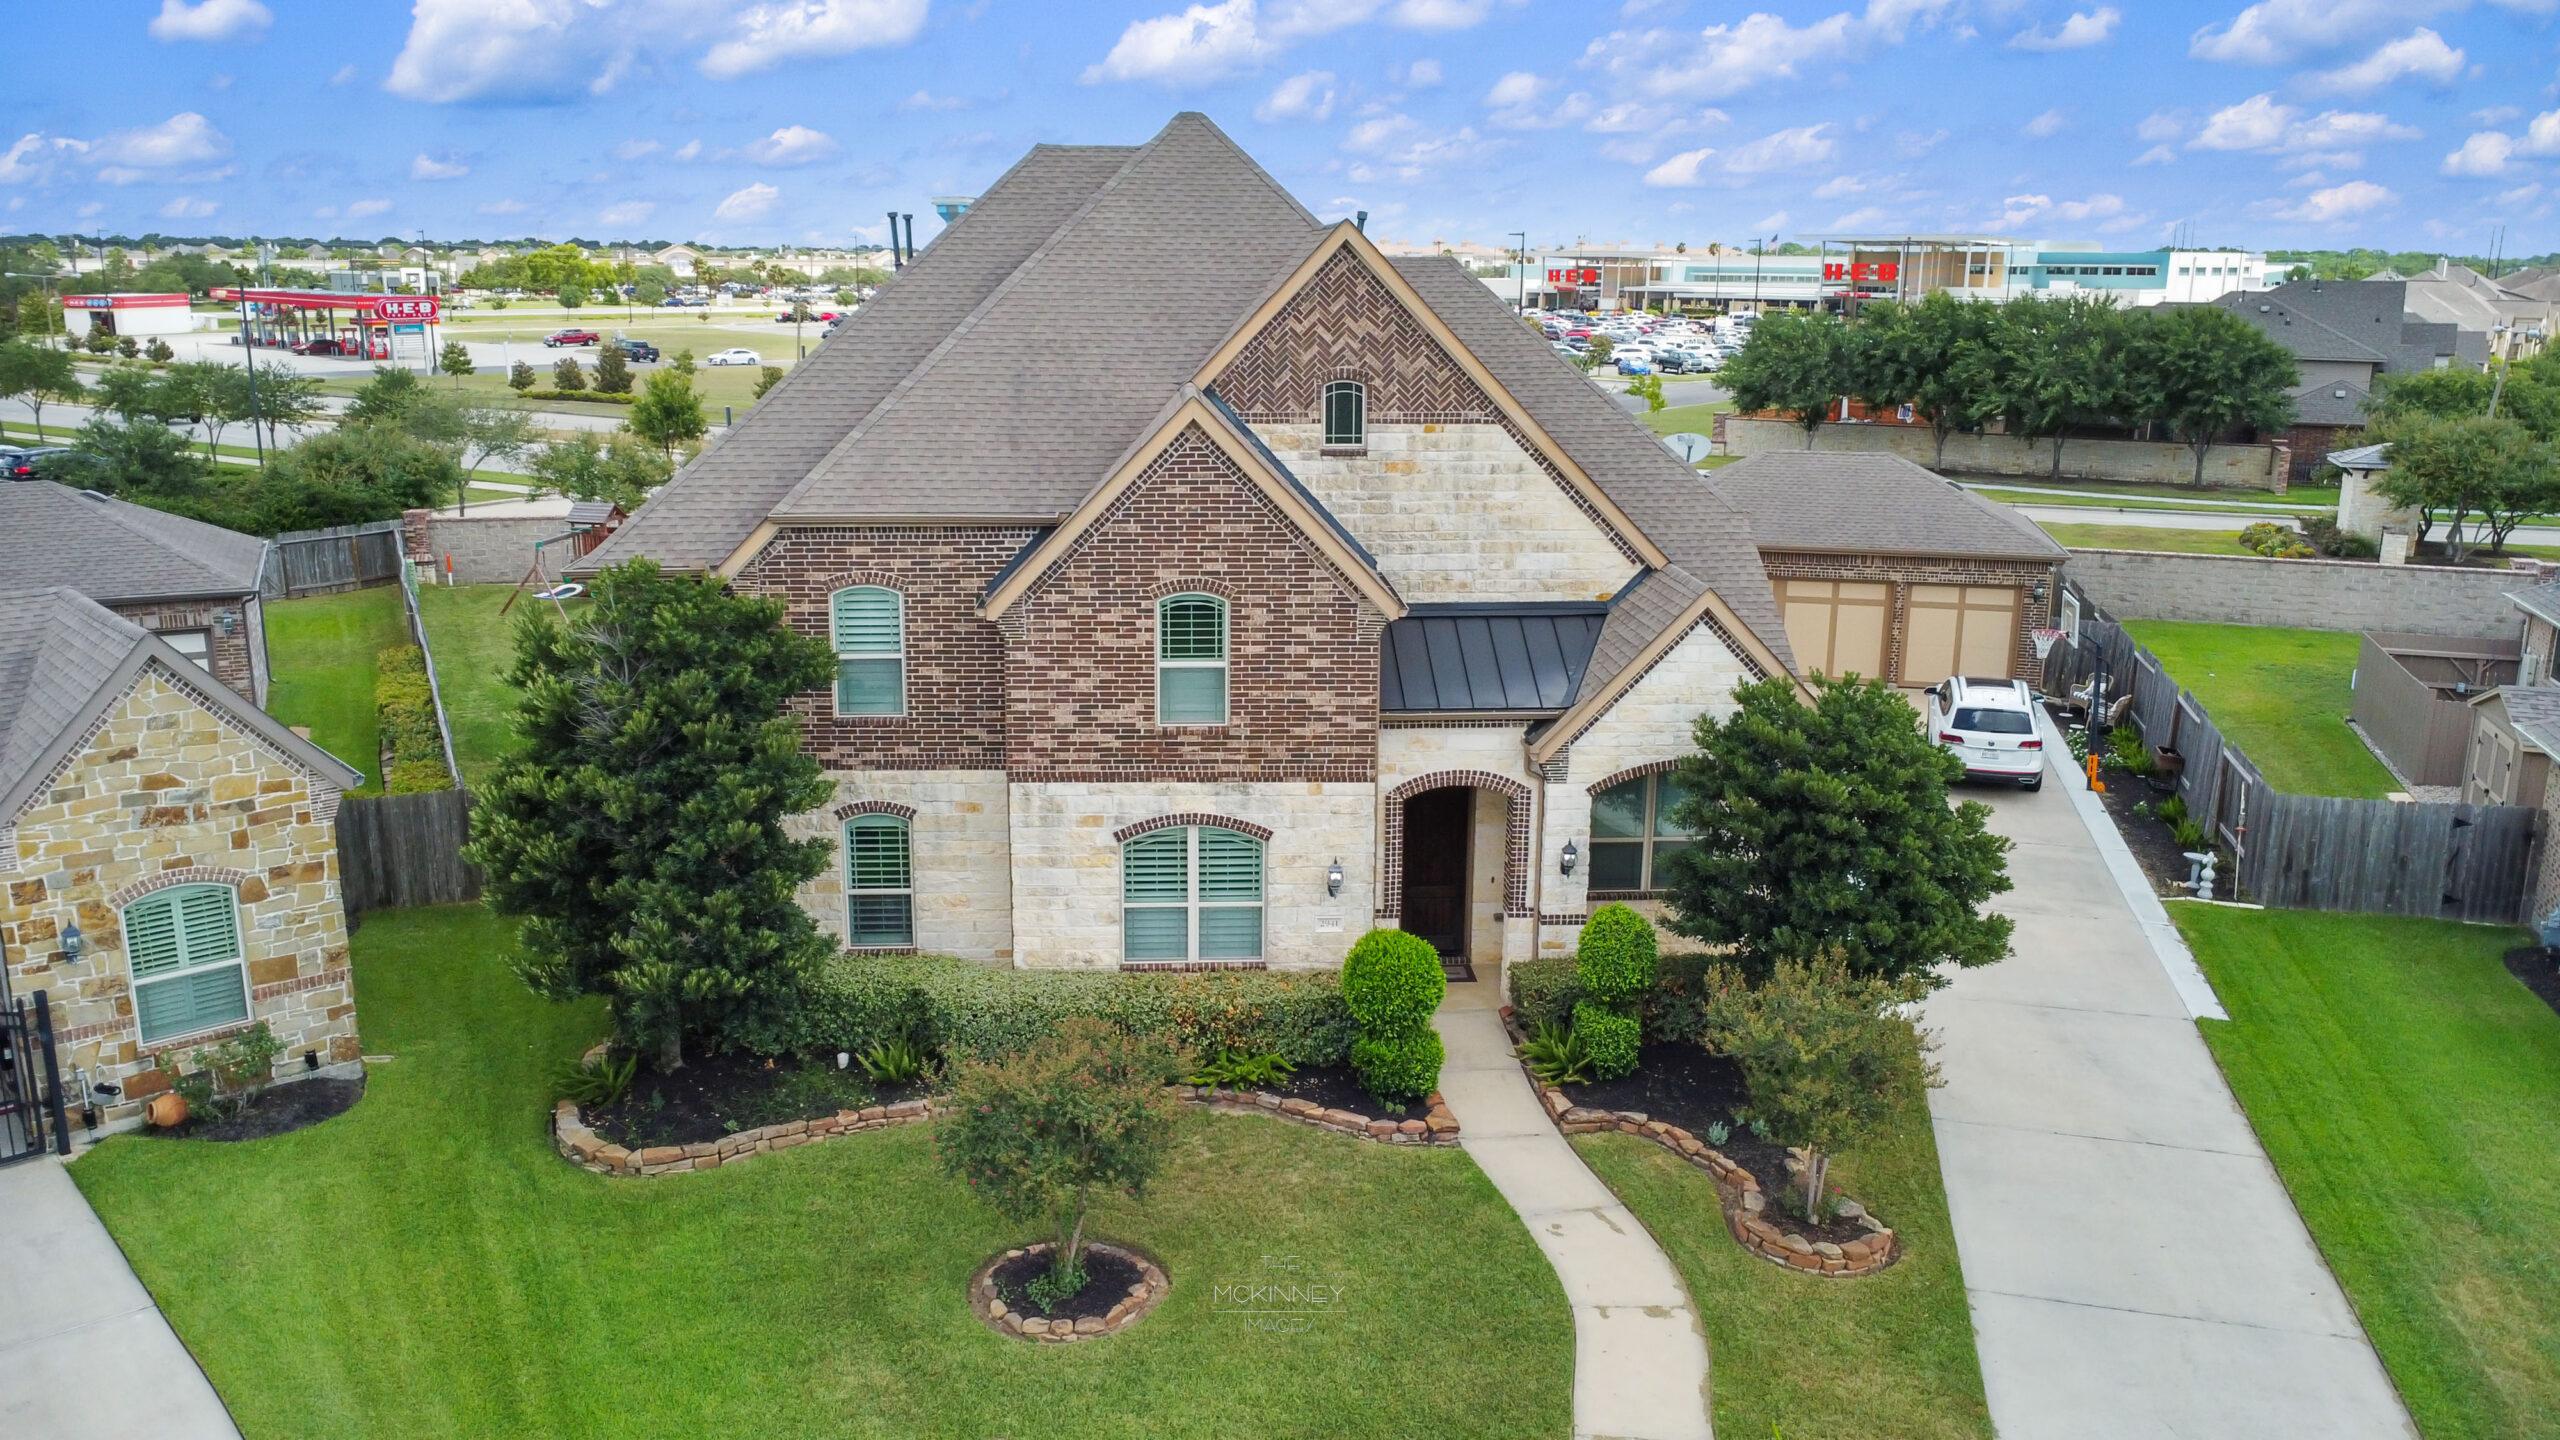 2941 Buffalo Spring Ln - League City, Tx - Real Estate Photography - The McKinney Images